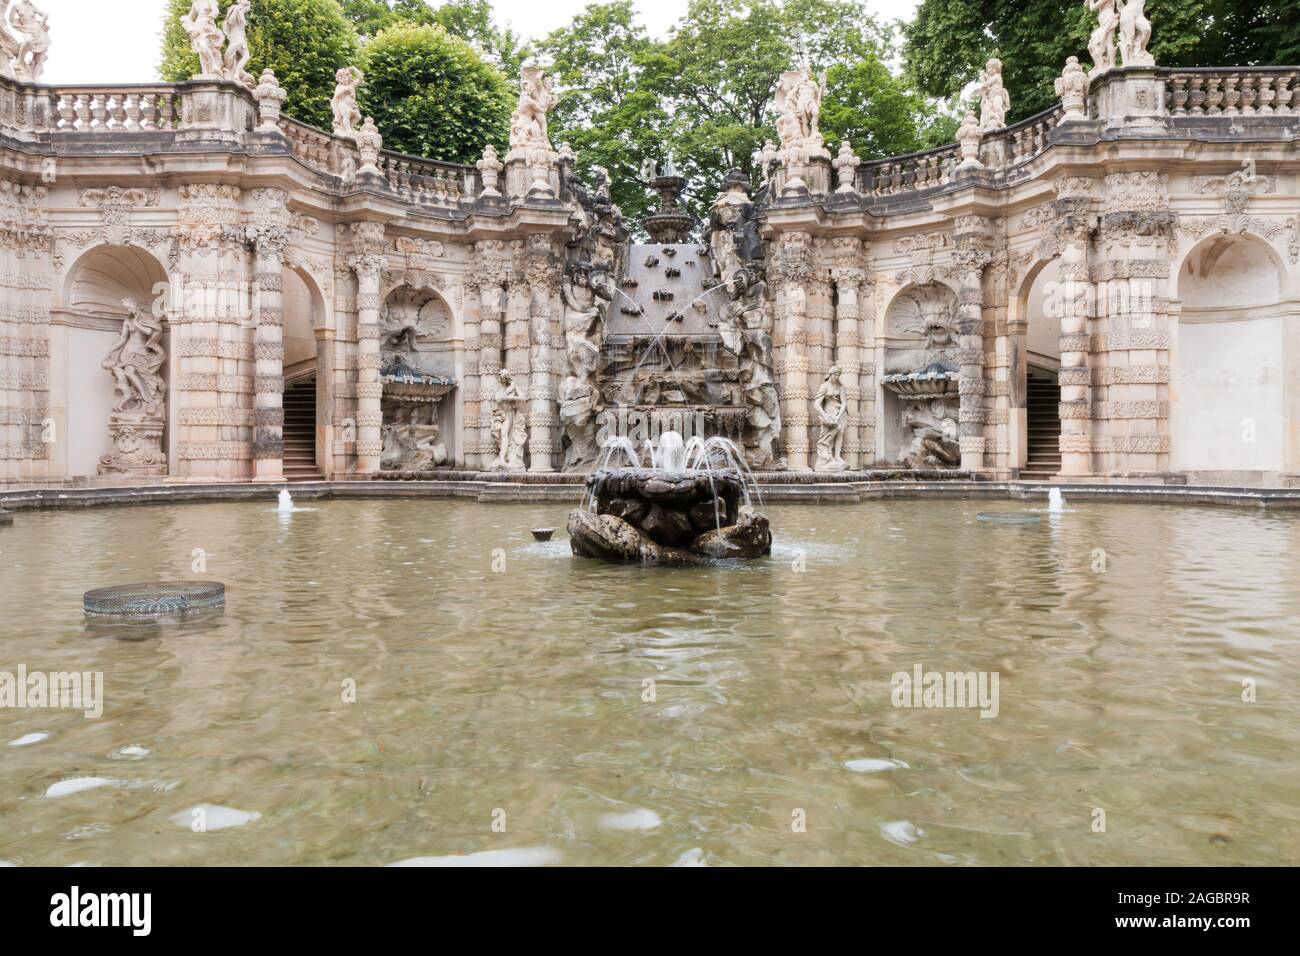 This fountain can you find in the famous Dresden Zwinger in Germany. Stock Photo